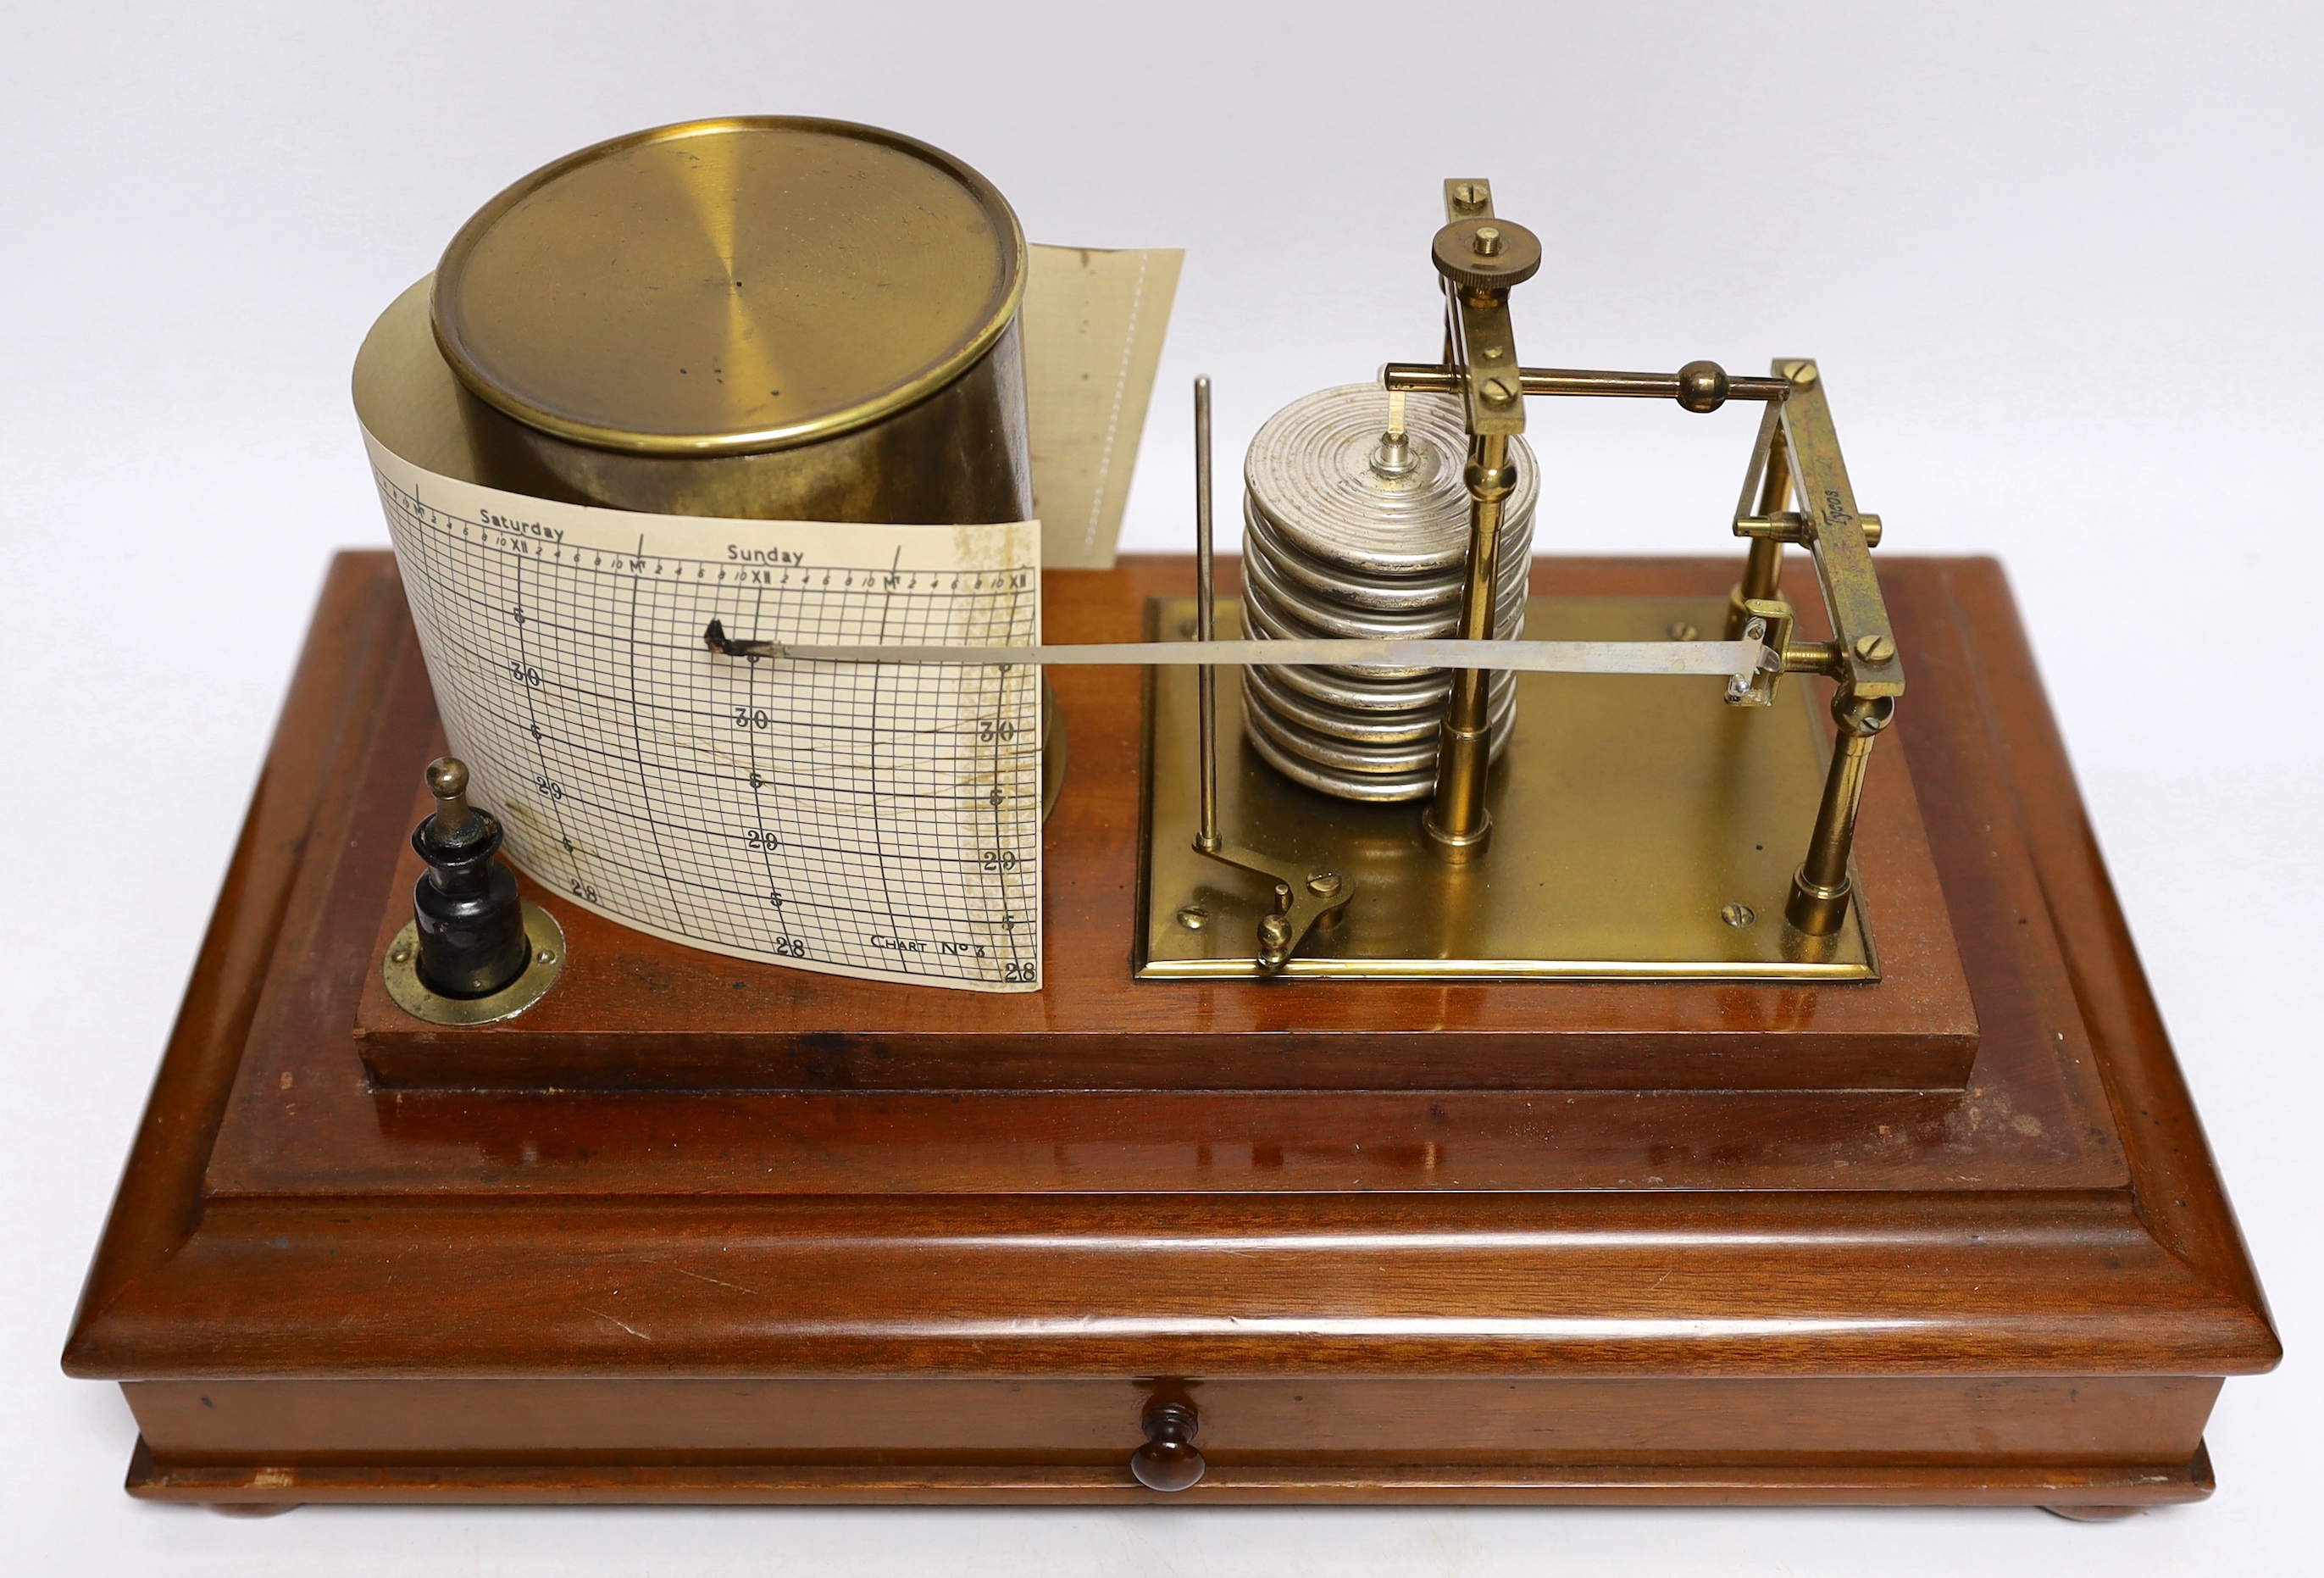 A 20th century barograph by Tycos, in a mahogany case with bevelled glass panels and incorporating an ink bottle and a drawer with spare graph papers, 36.5cm x 21.5cm